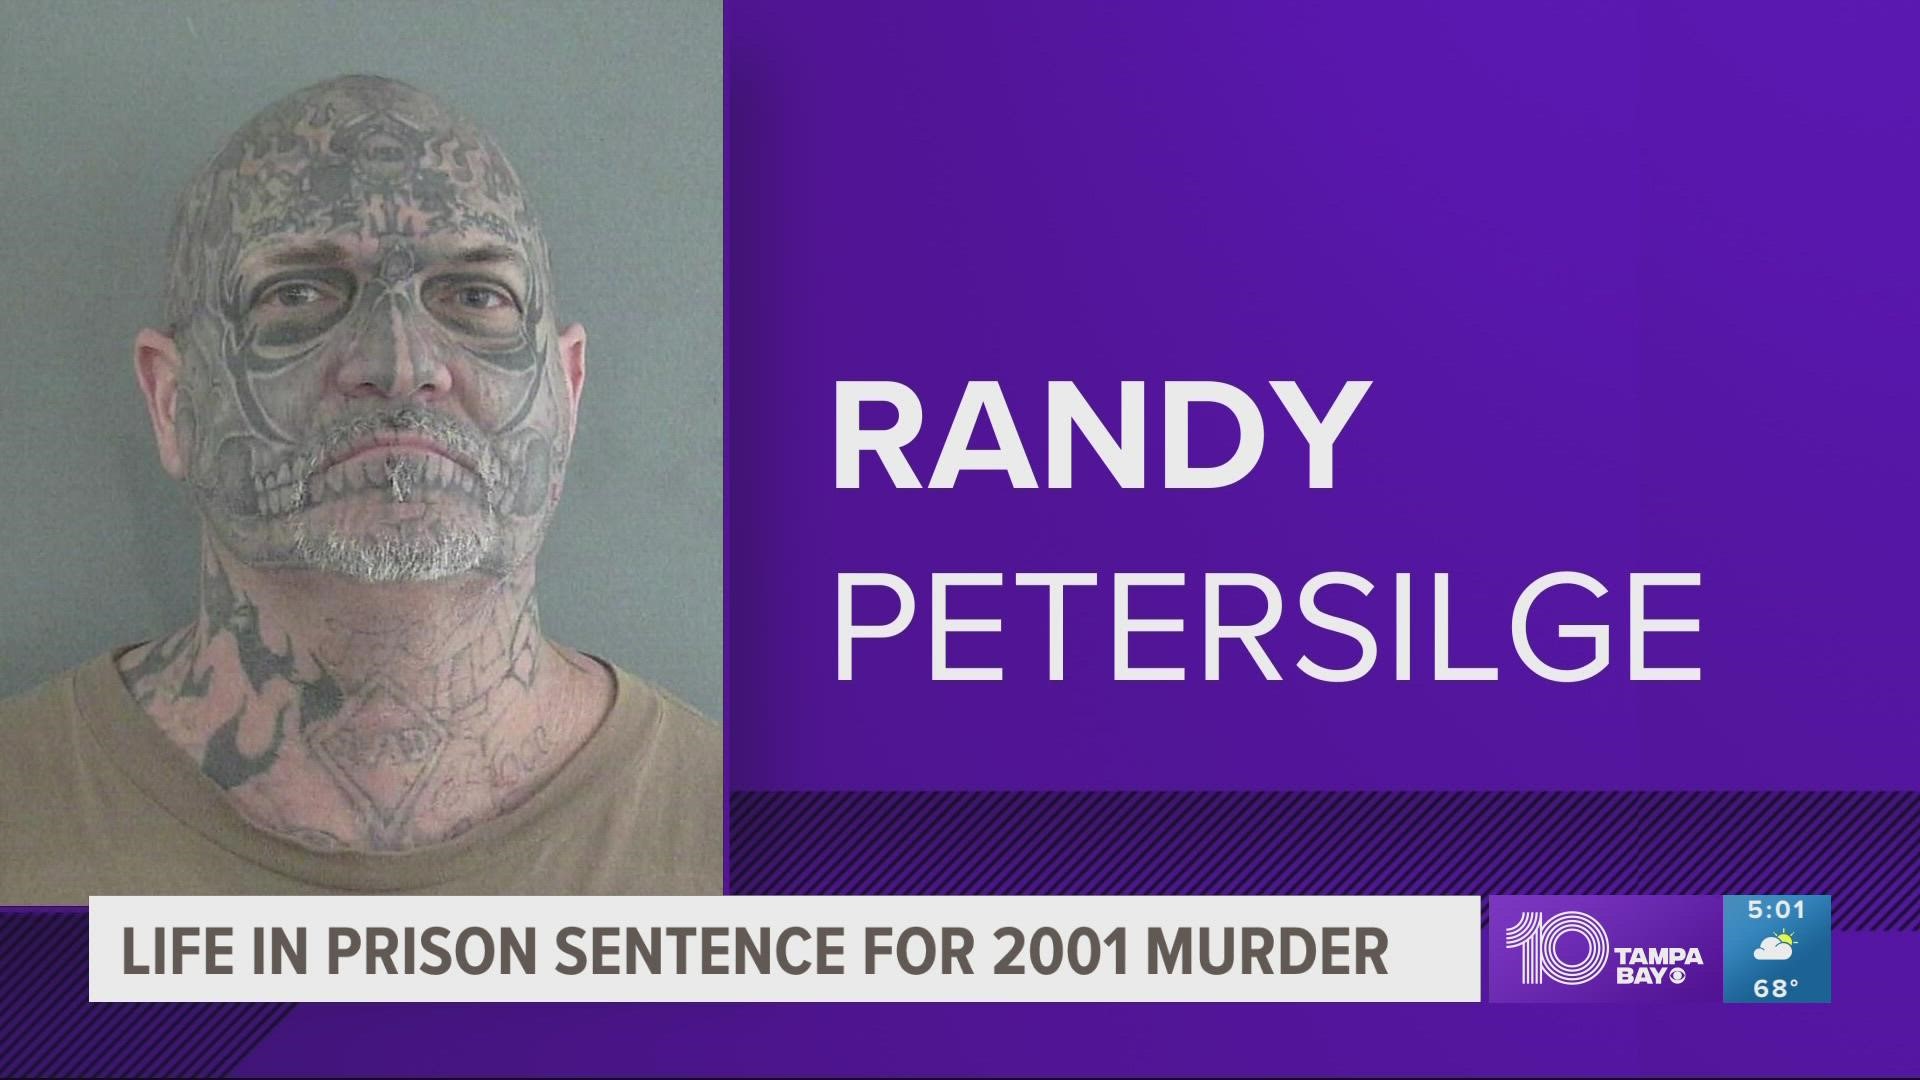 Randy Petersilge is sentenced to life without parole for the 2001 murder of Simon Clarke.